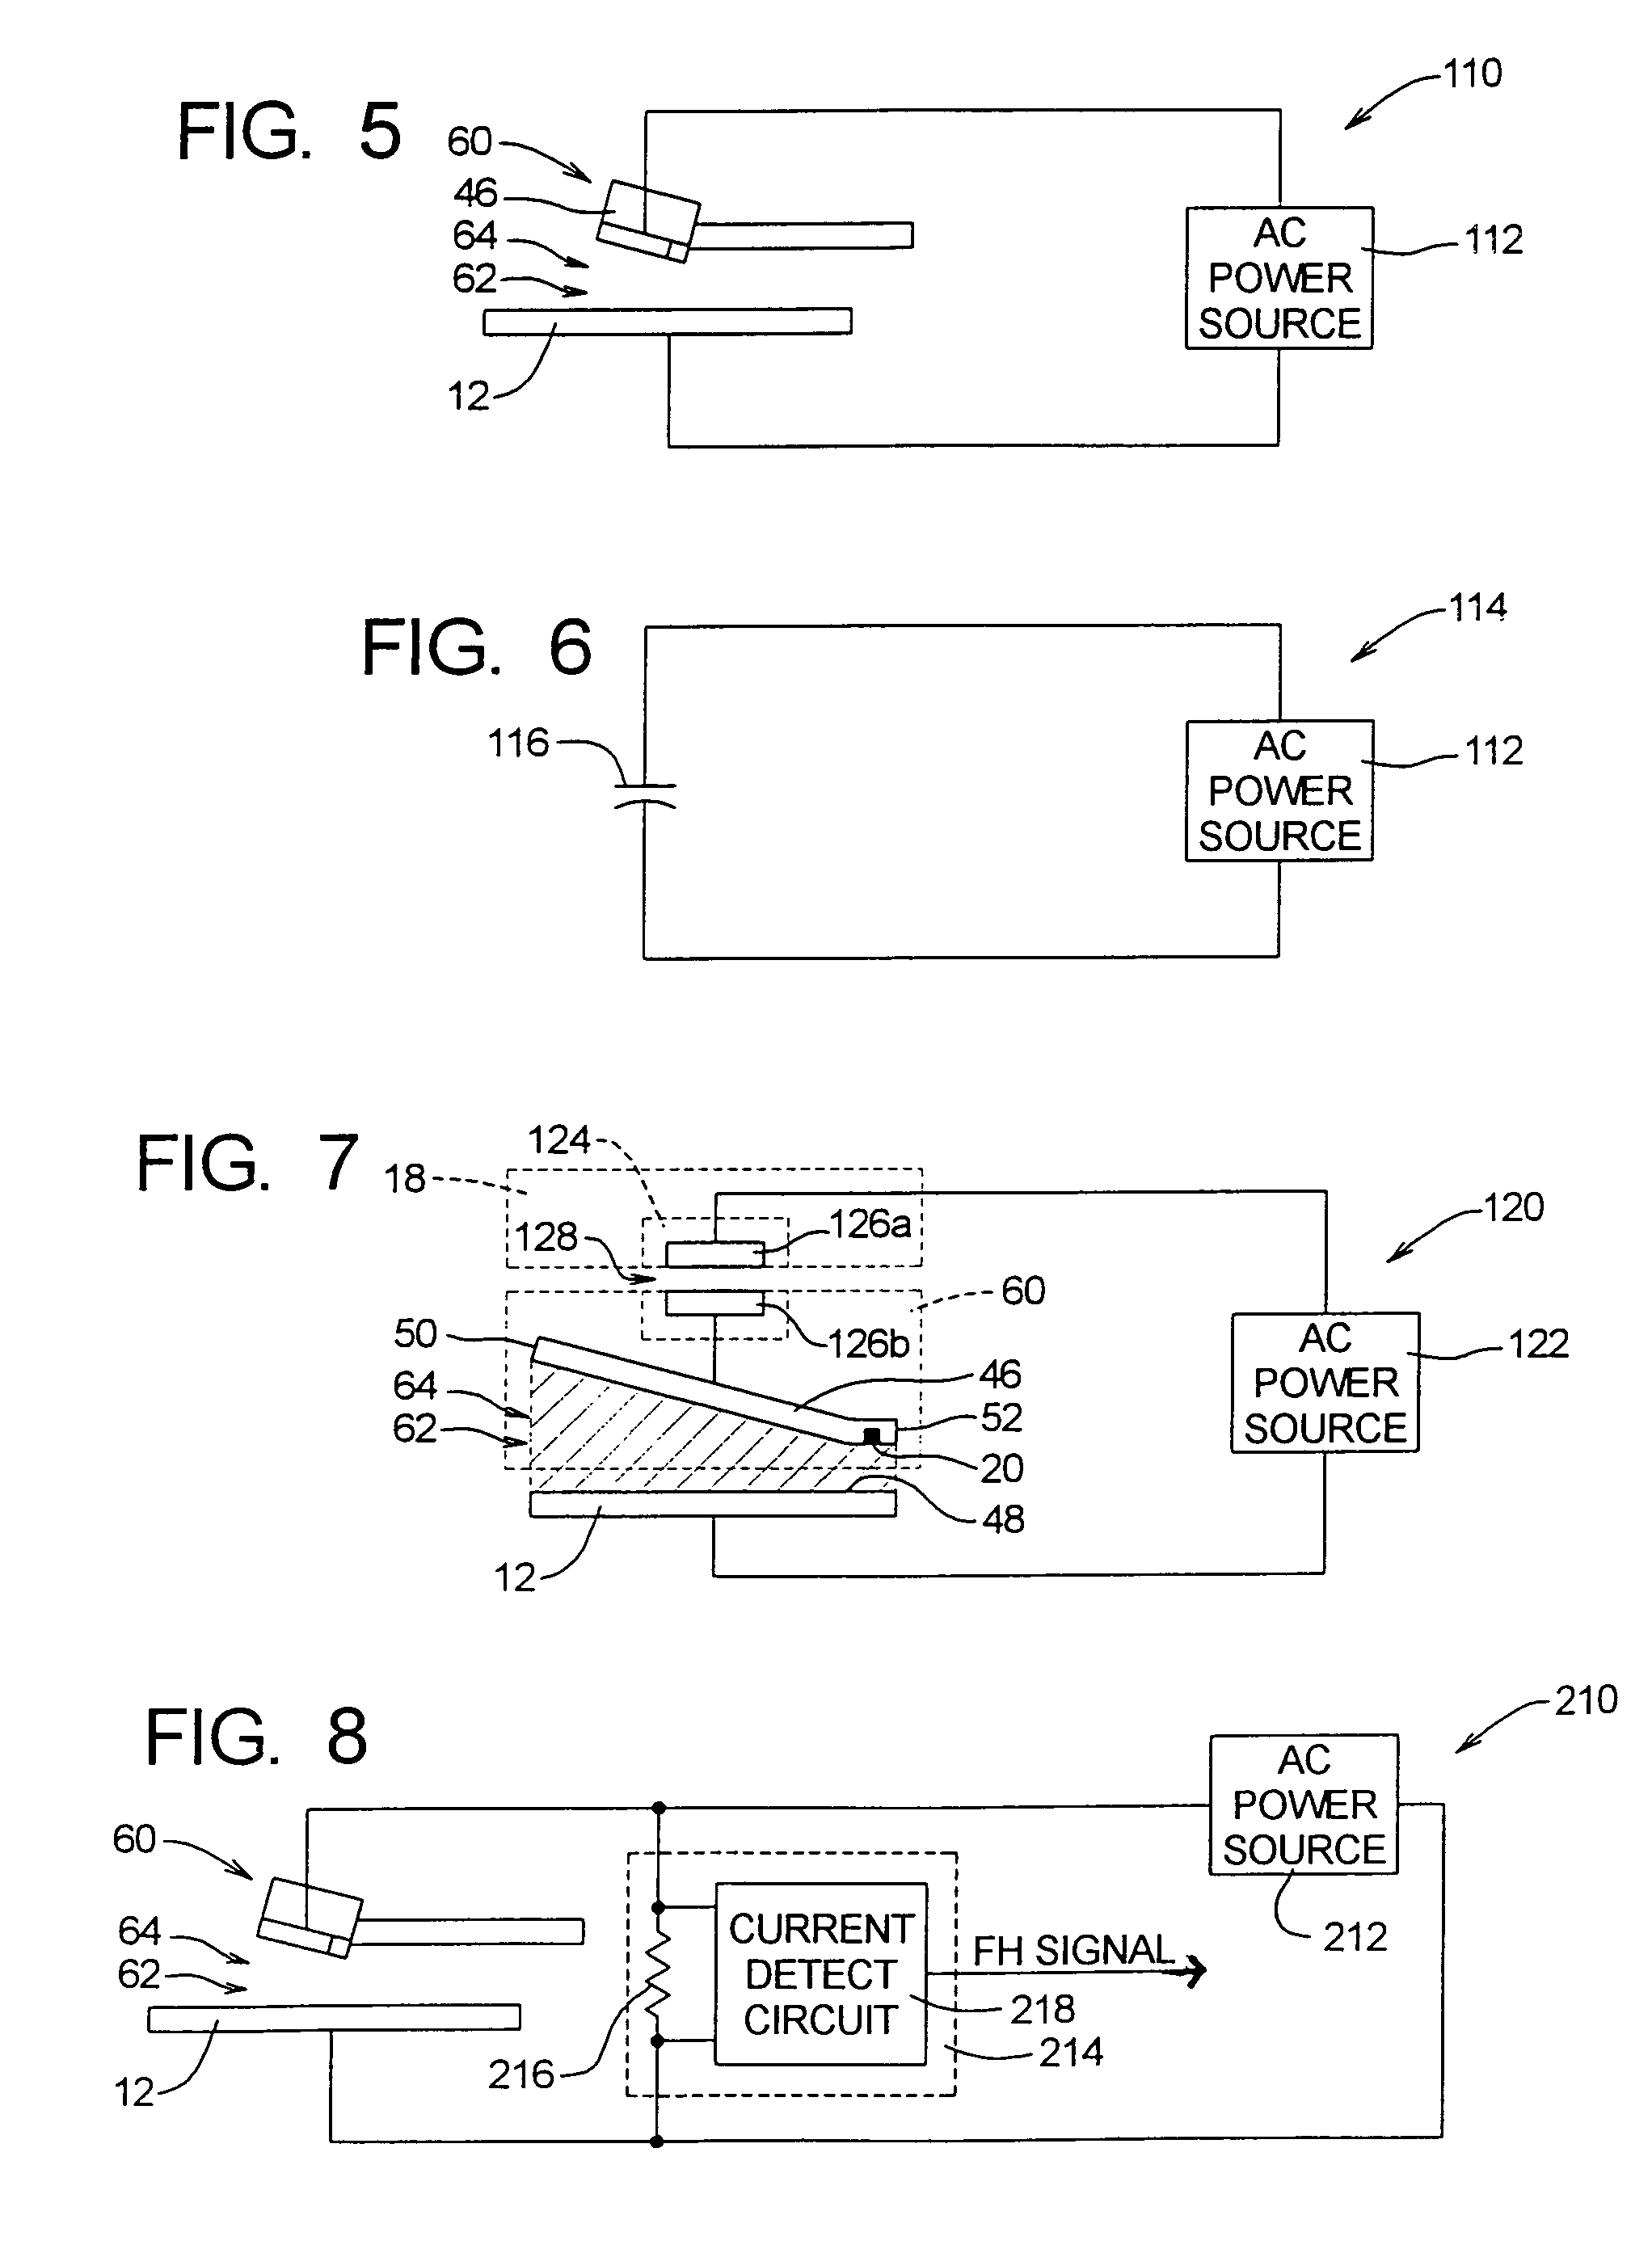 Disk drive with AC exciter for head/disk interface